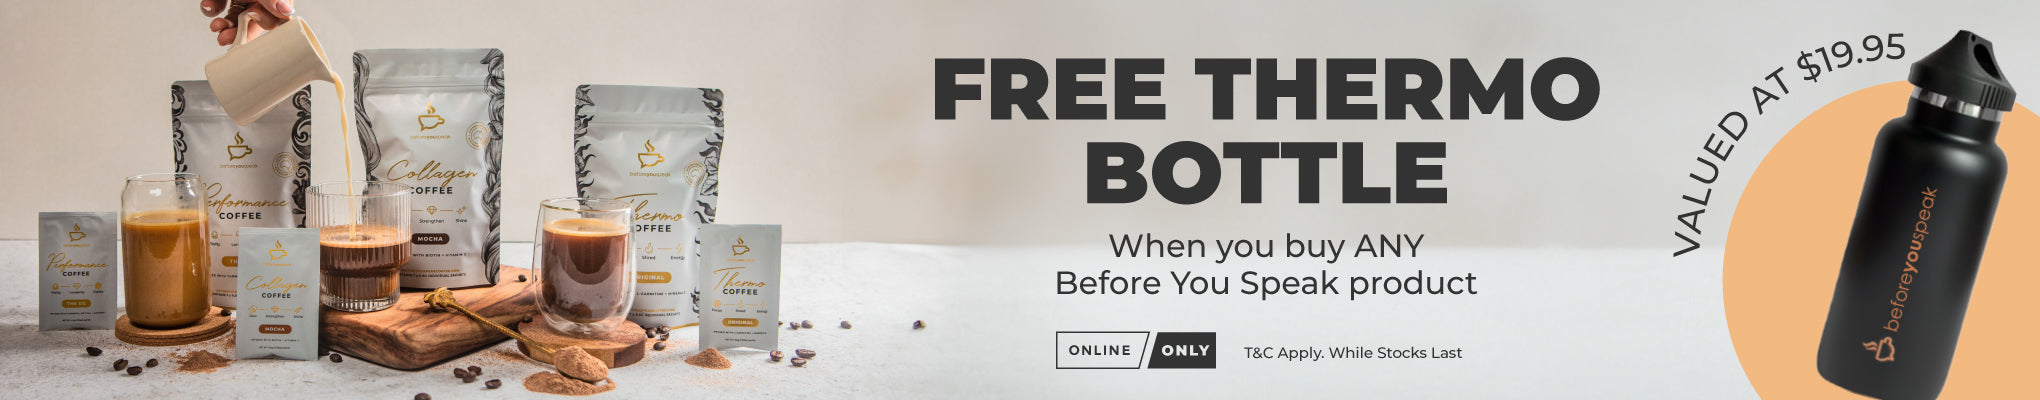 BYS Online Deal - Free Thermo Bottle with any BYS product